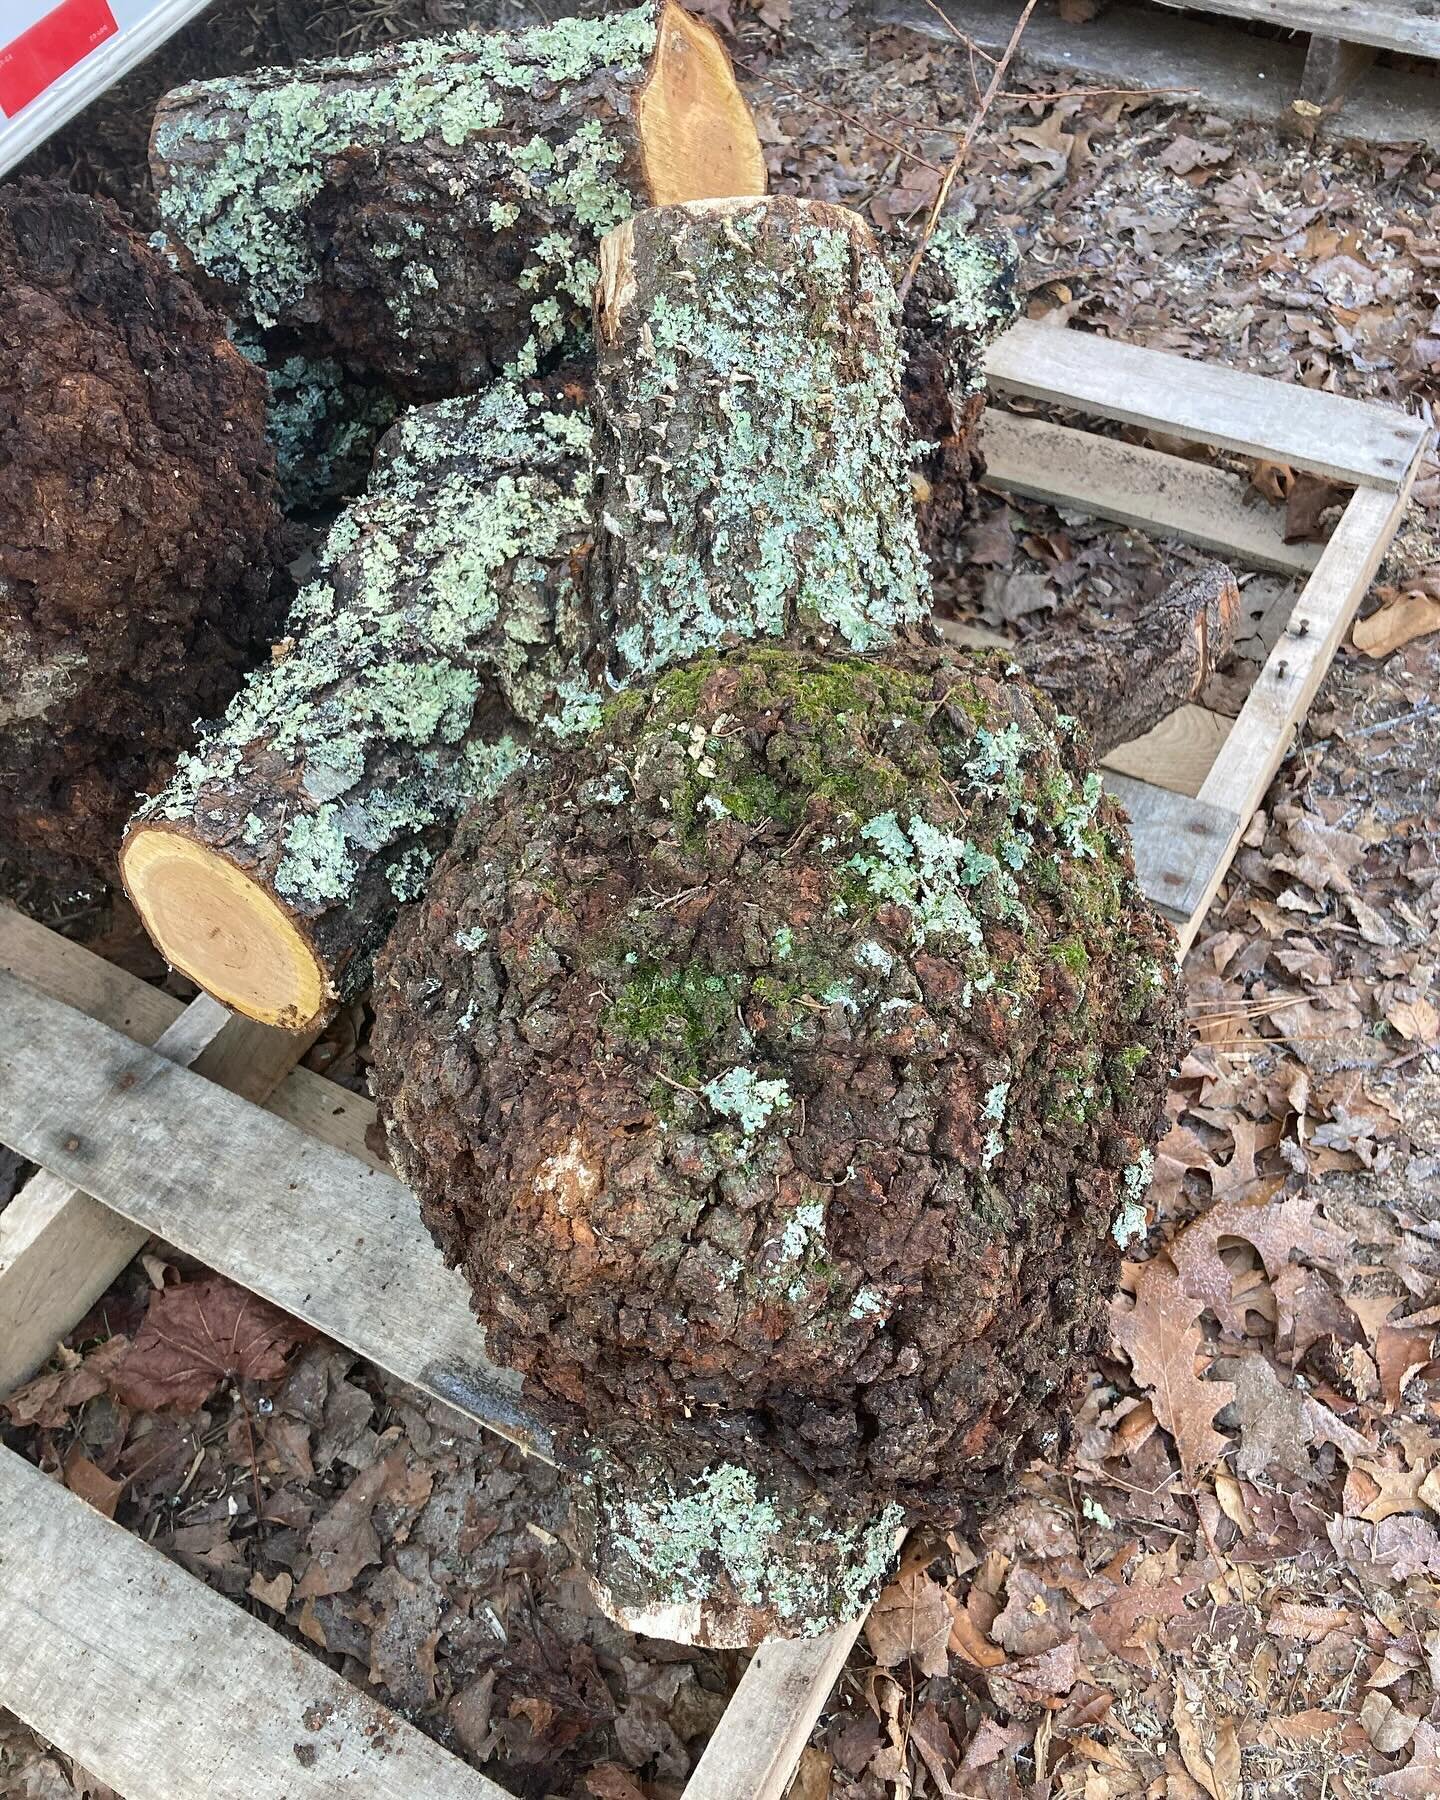 Native cherry burls: Two large. Several  small. DM me if you would like one (or multiple). Asking price is any reasonable donation to the farm. Would like to see them go to good use.